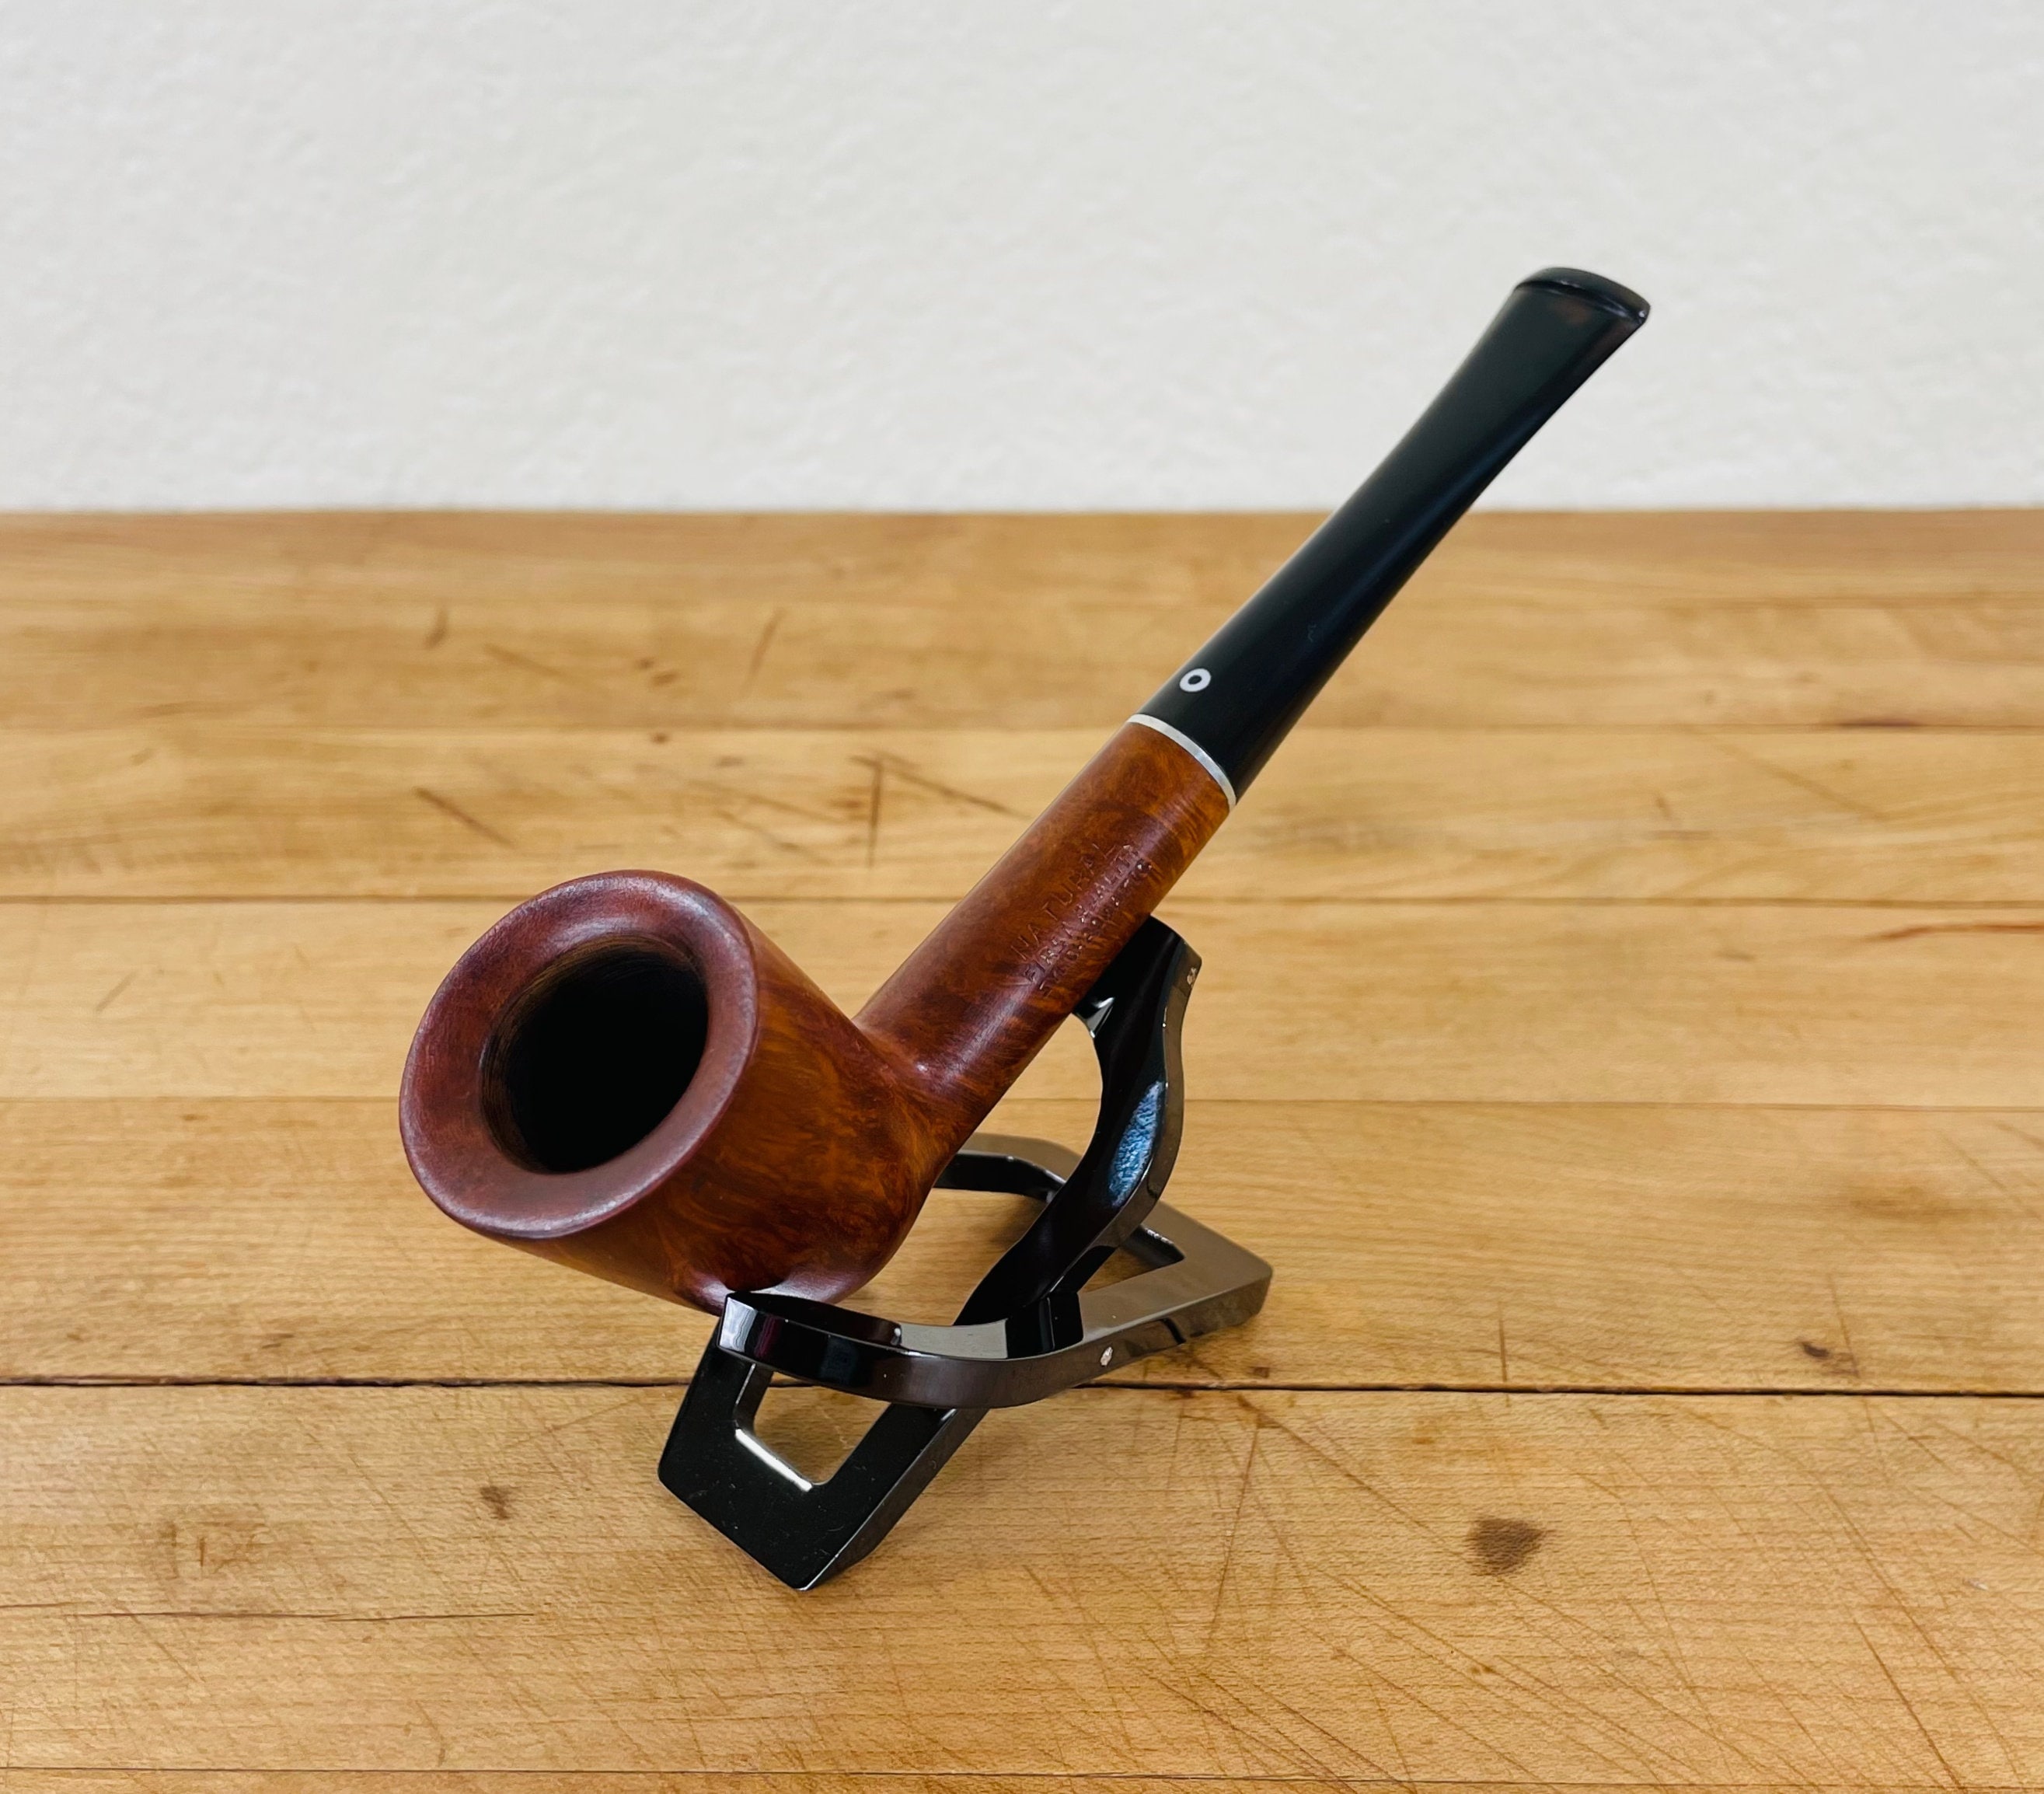 Classic Tobacco Pipe Lucky Best Old Briar Vtg Wooden Smoking Pipe Brow, Online Shop